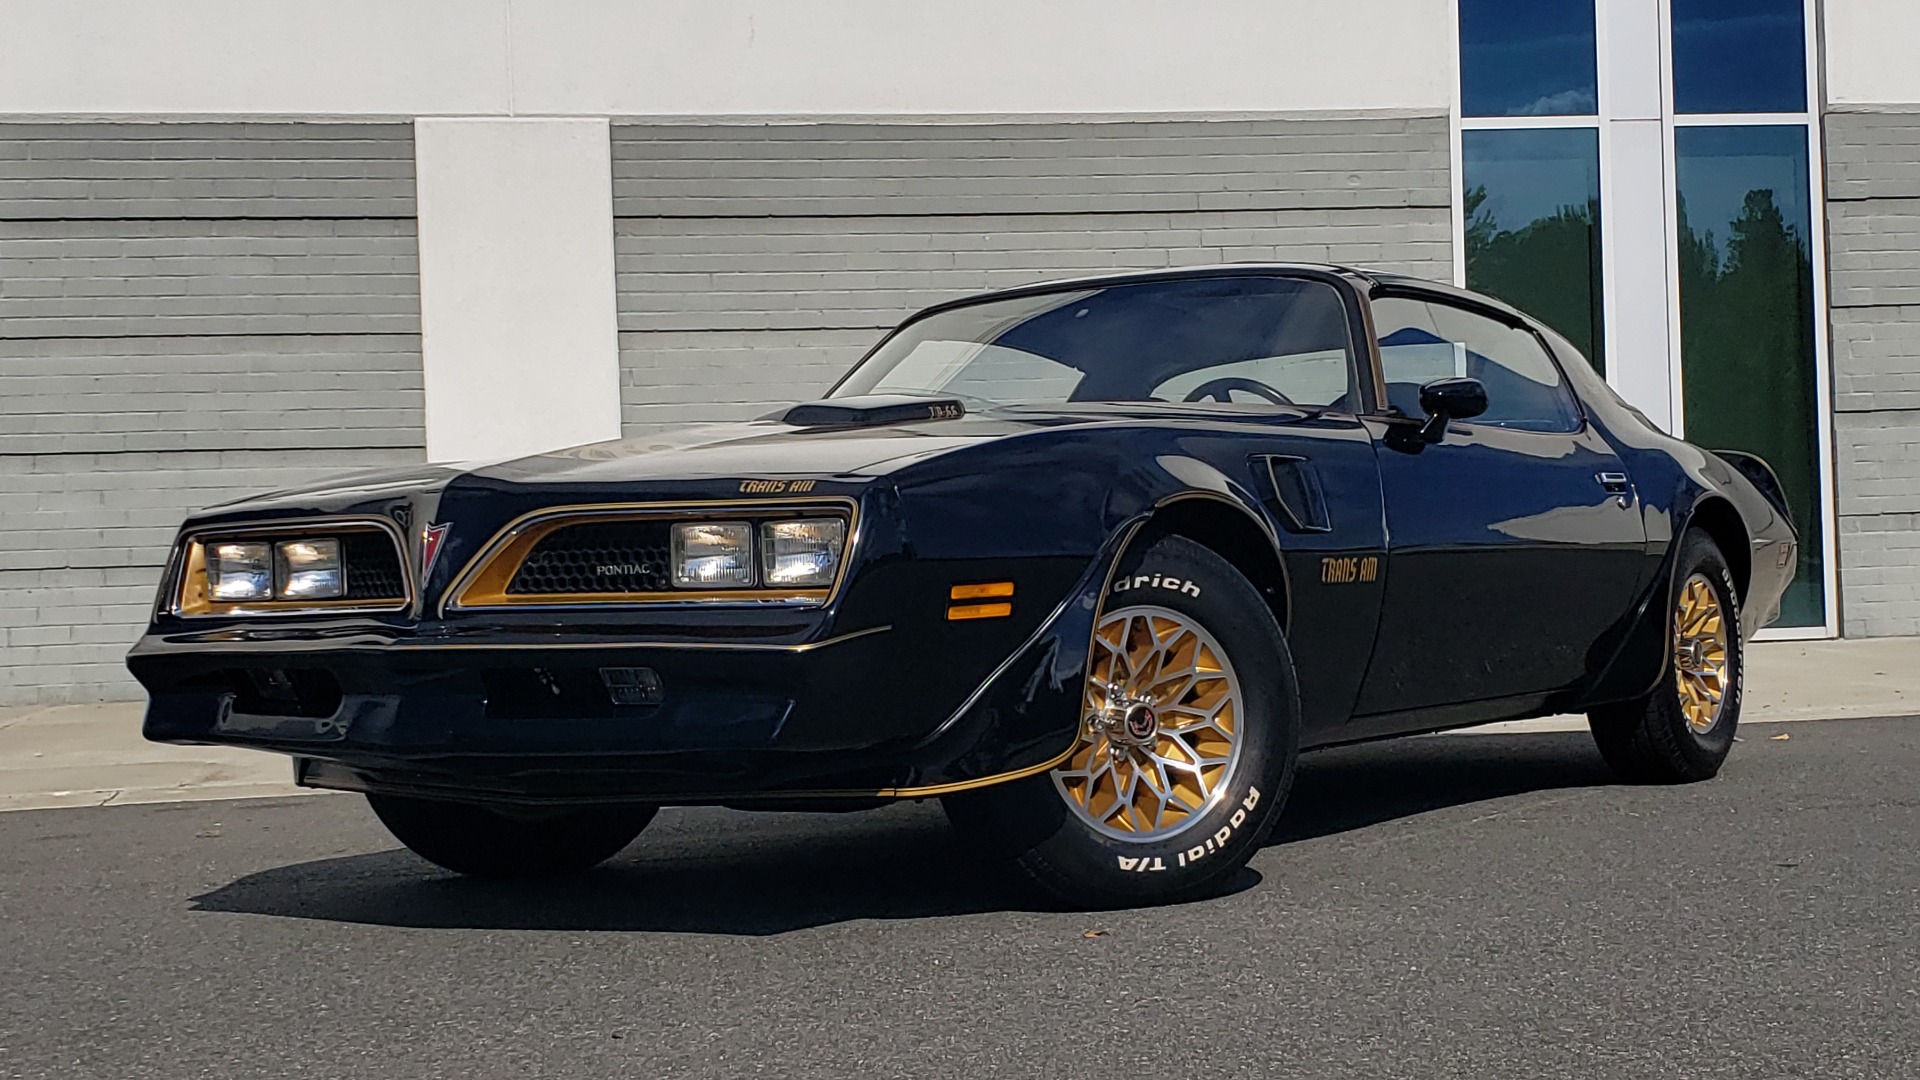 Used 1977 Pontiac TRANS AM Y82 SPECIAL EDITION BANDIT / 6.6L / 4-SPEED MANUAL / LOW MILES for sale Sold at Formula Imports in Charlotte NC 28227 3